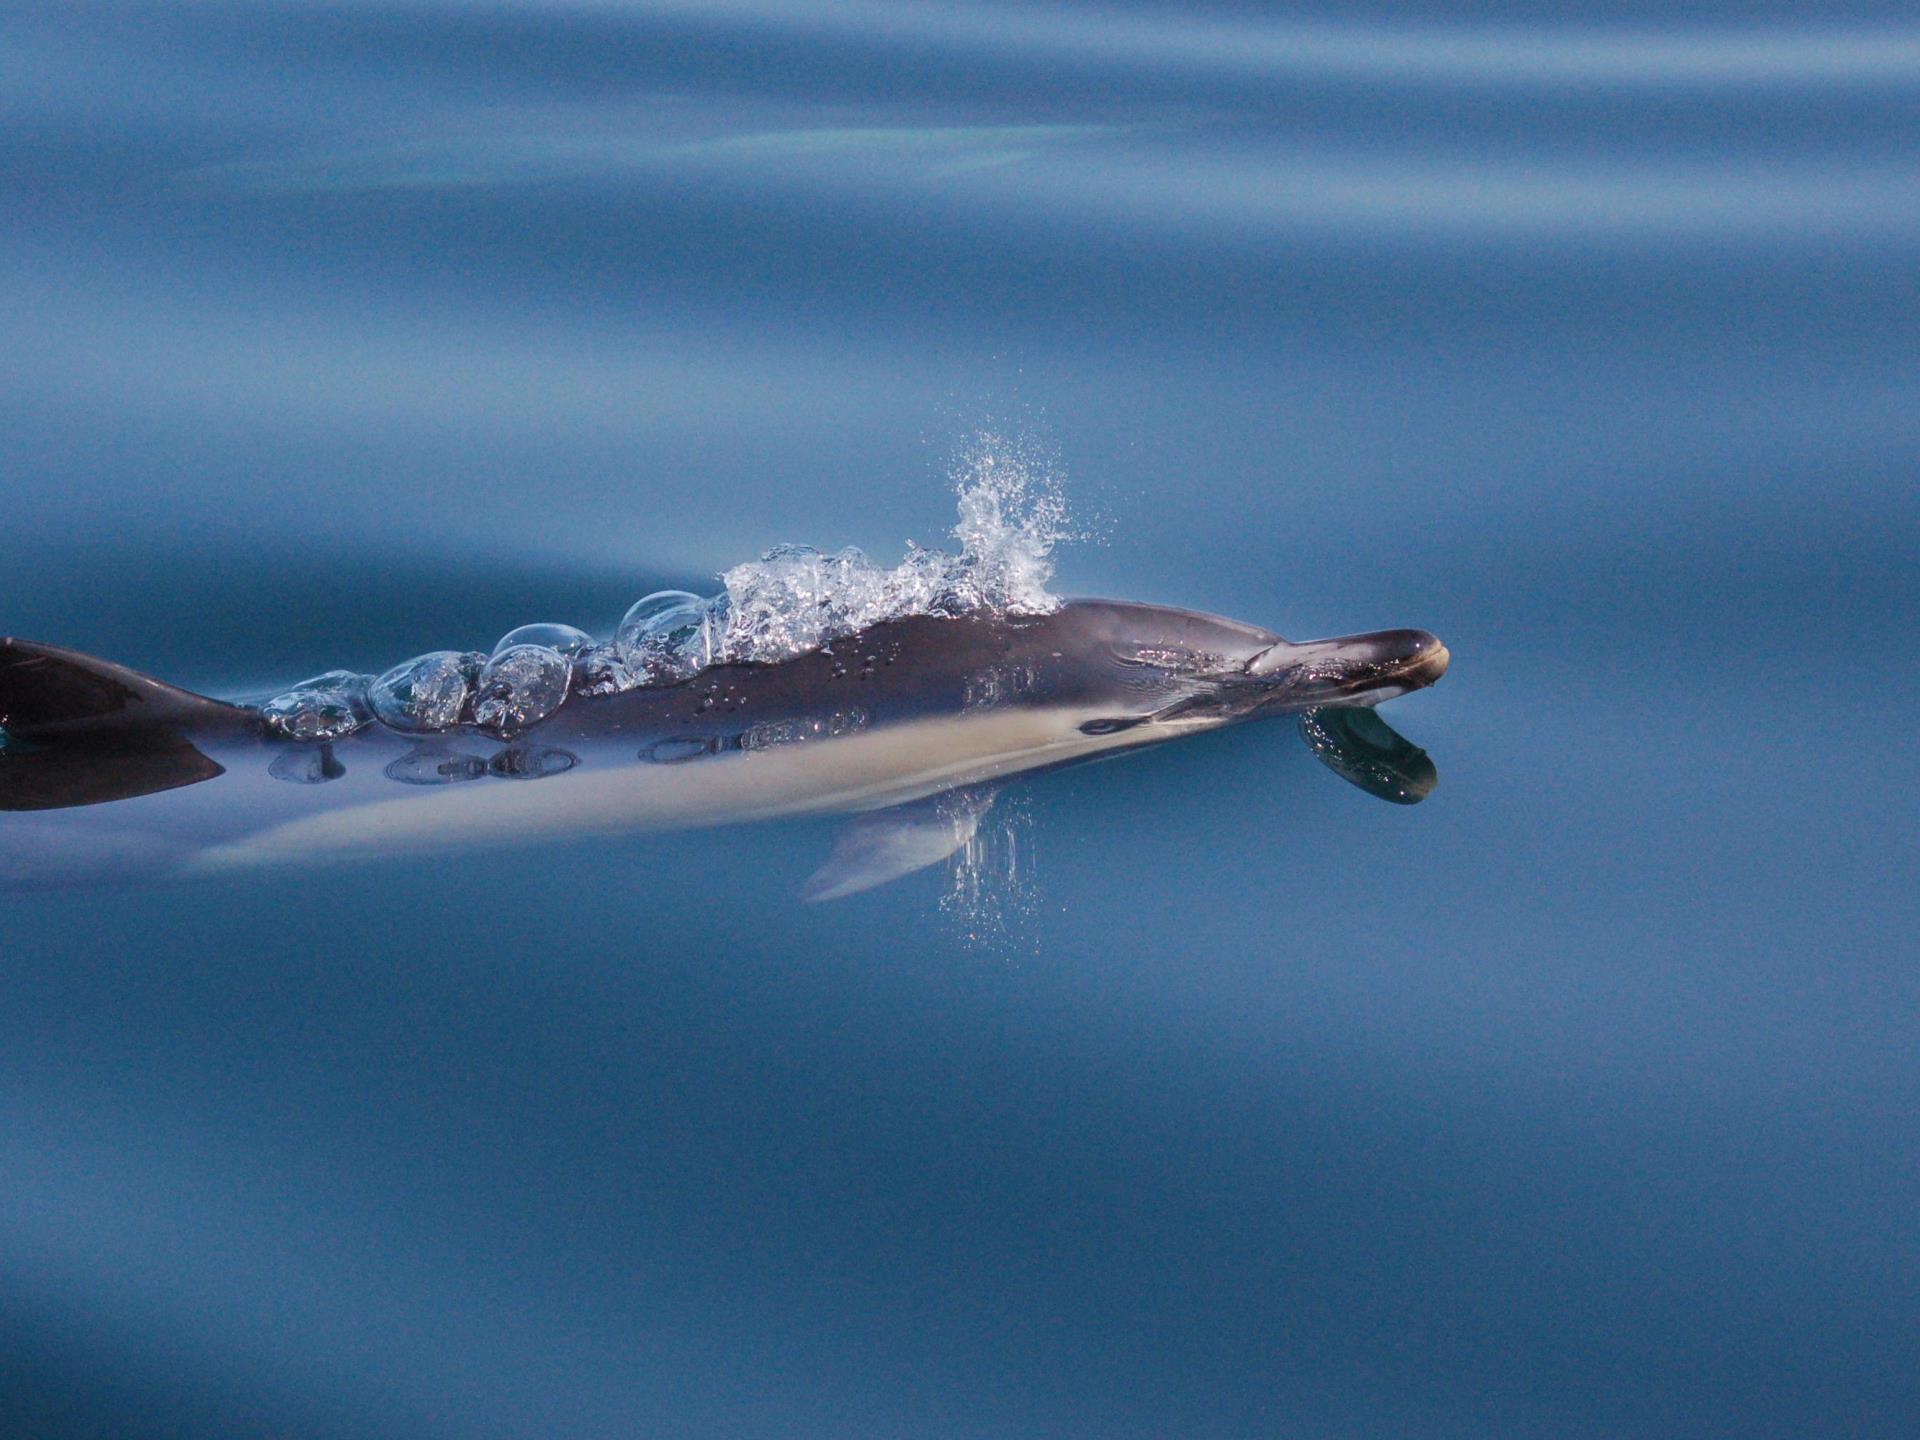 Common dolphin seen on one of our trips.